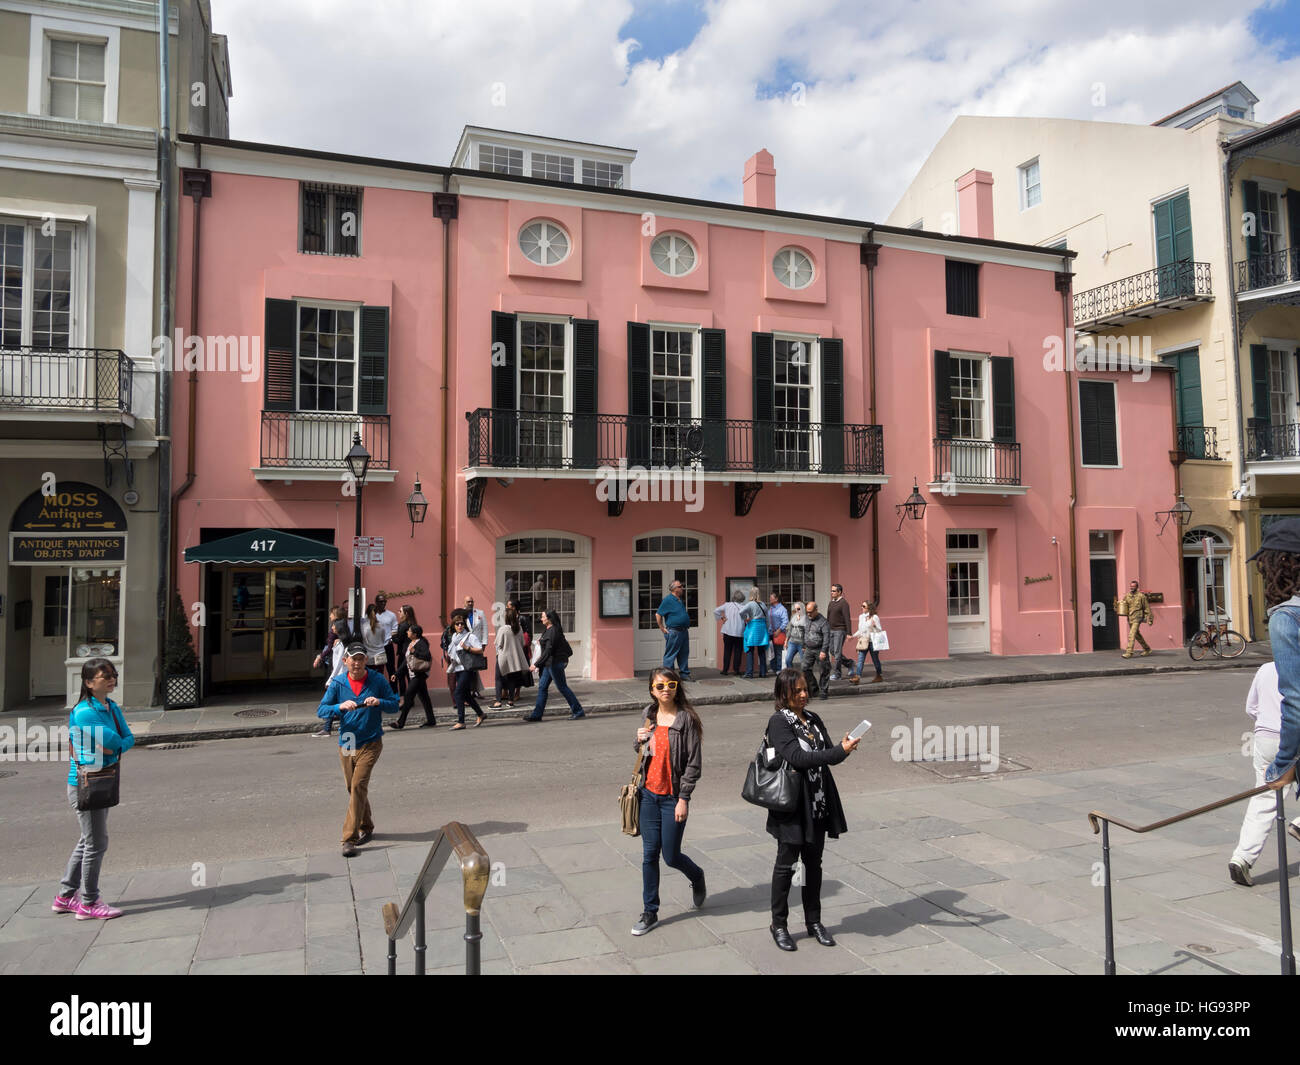 Famous Brennans Restaurant, New Orleans French Quarter. Asian tourists take selfies in front of the restaurant. Stock Photo